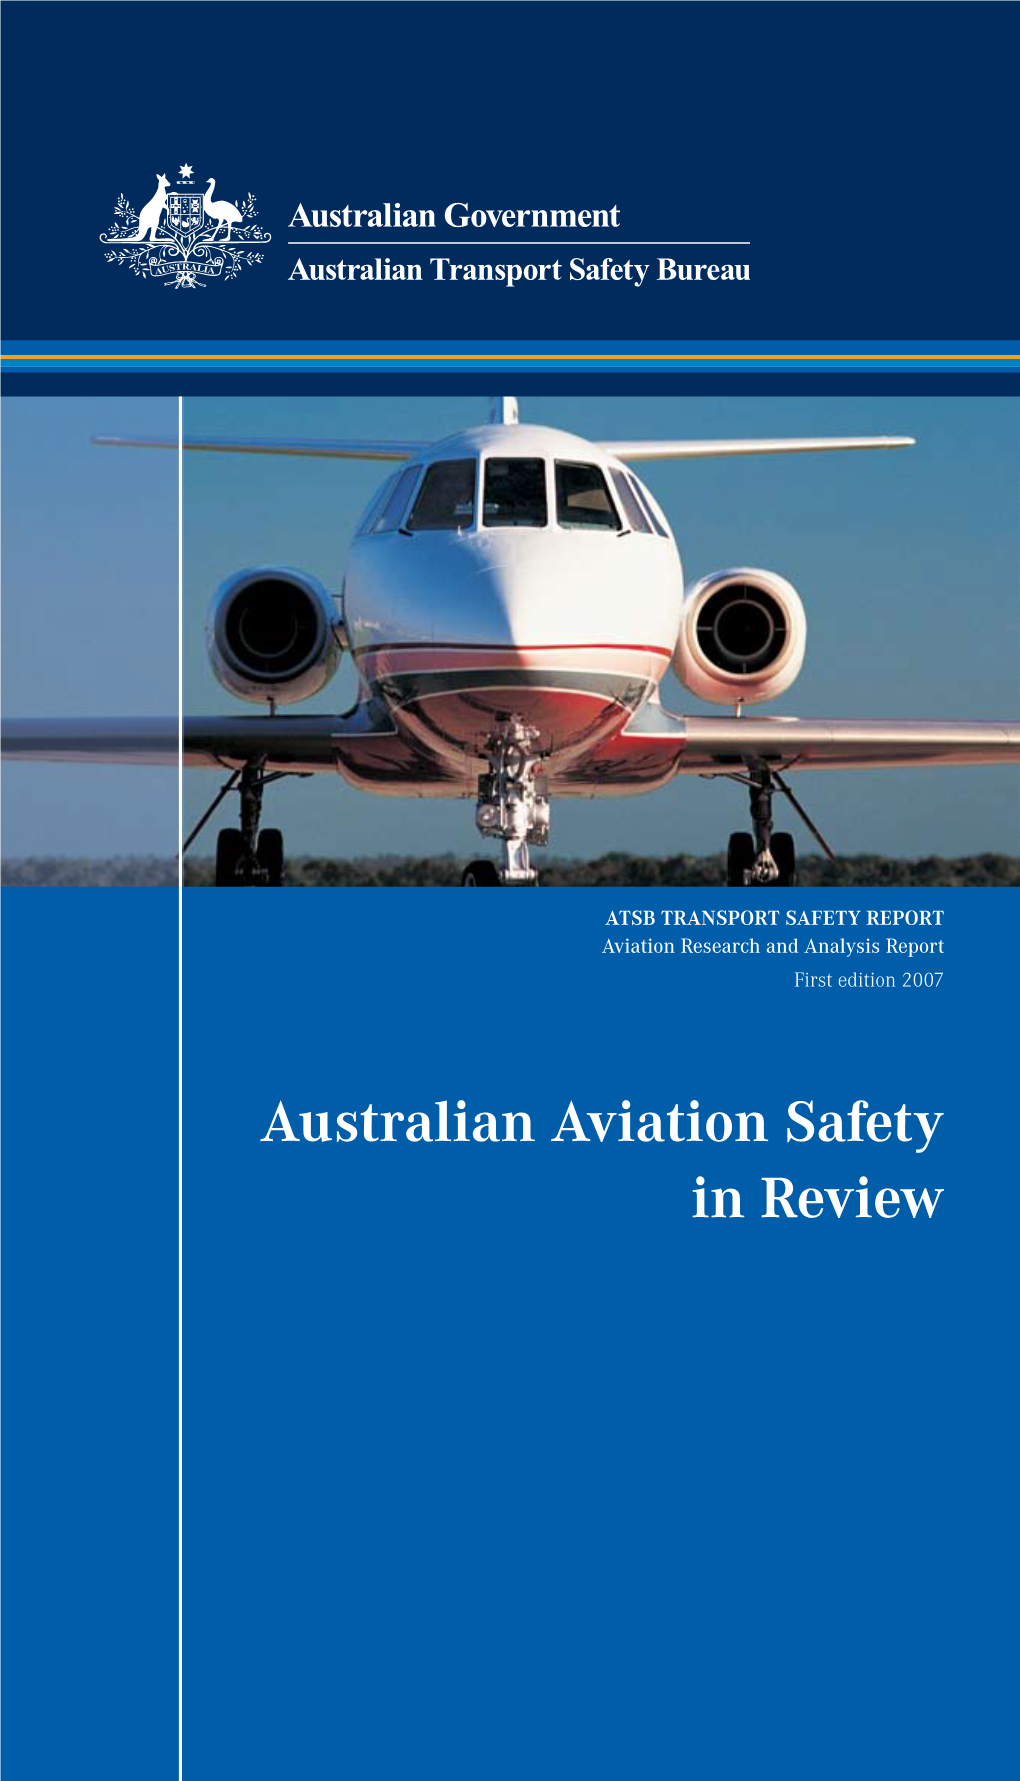 Australian Aviation Safety in Review